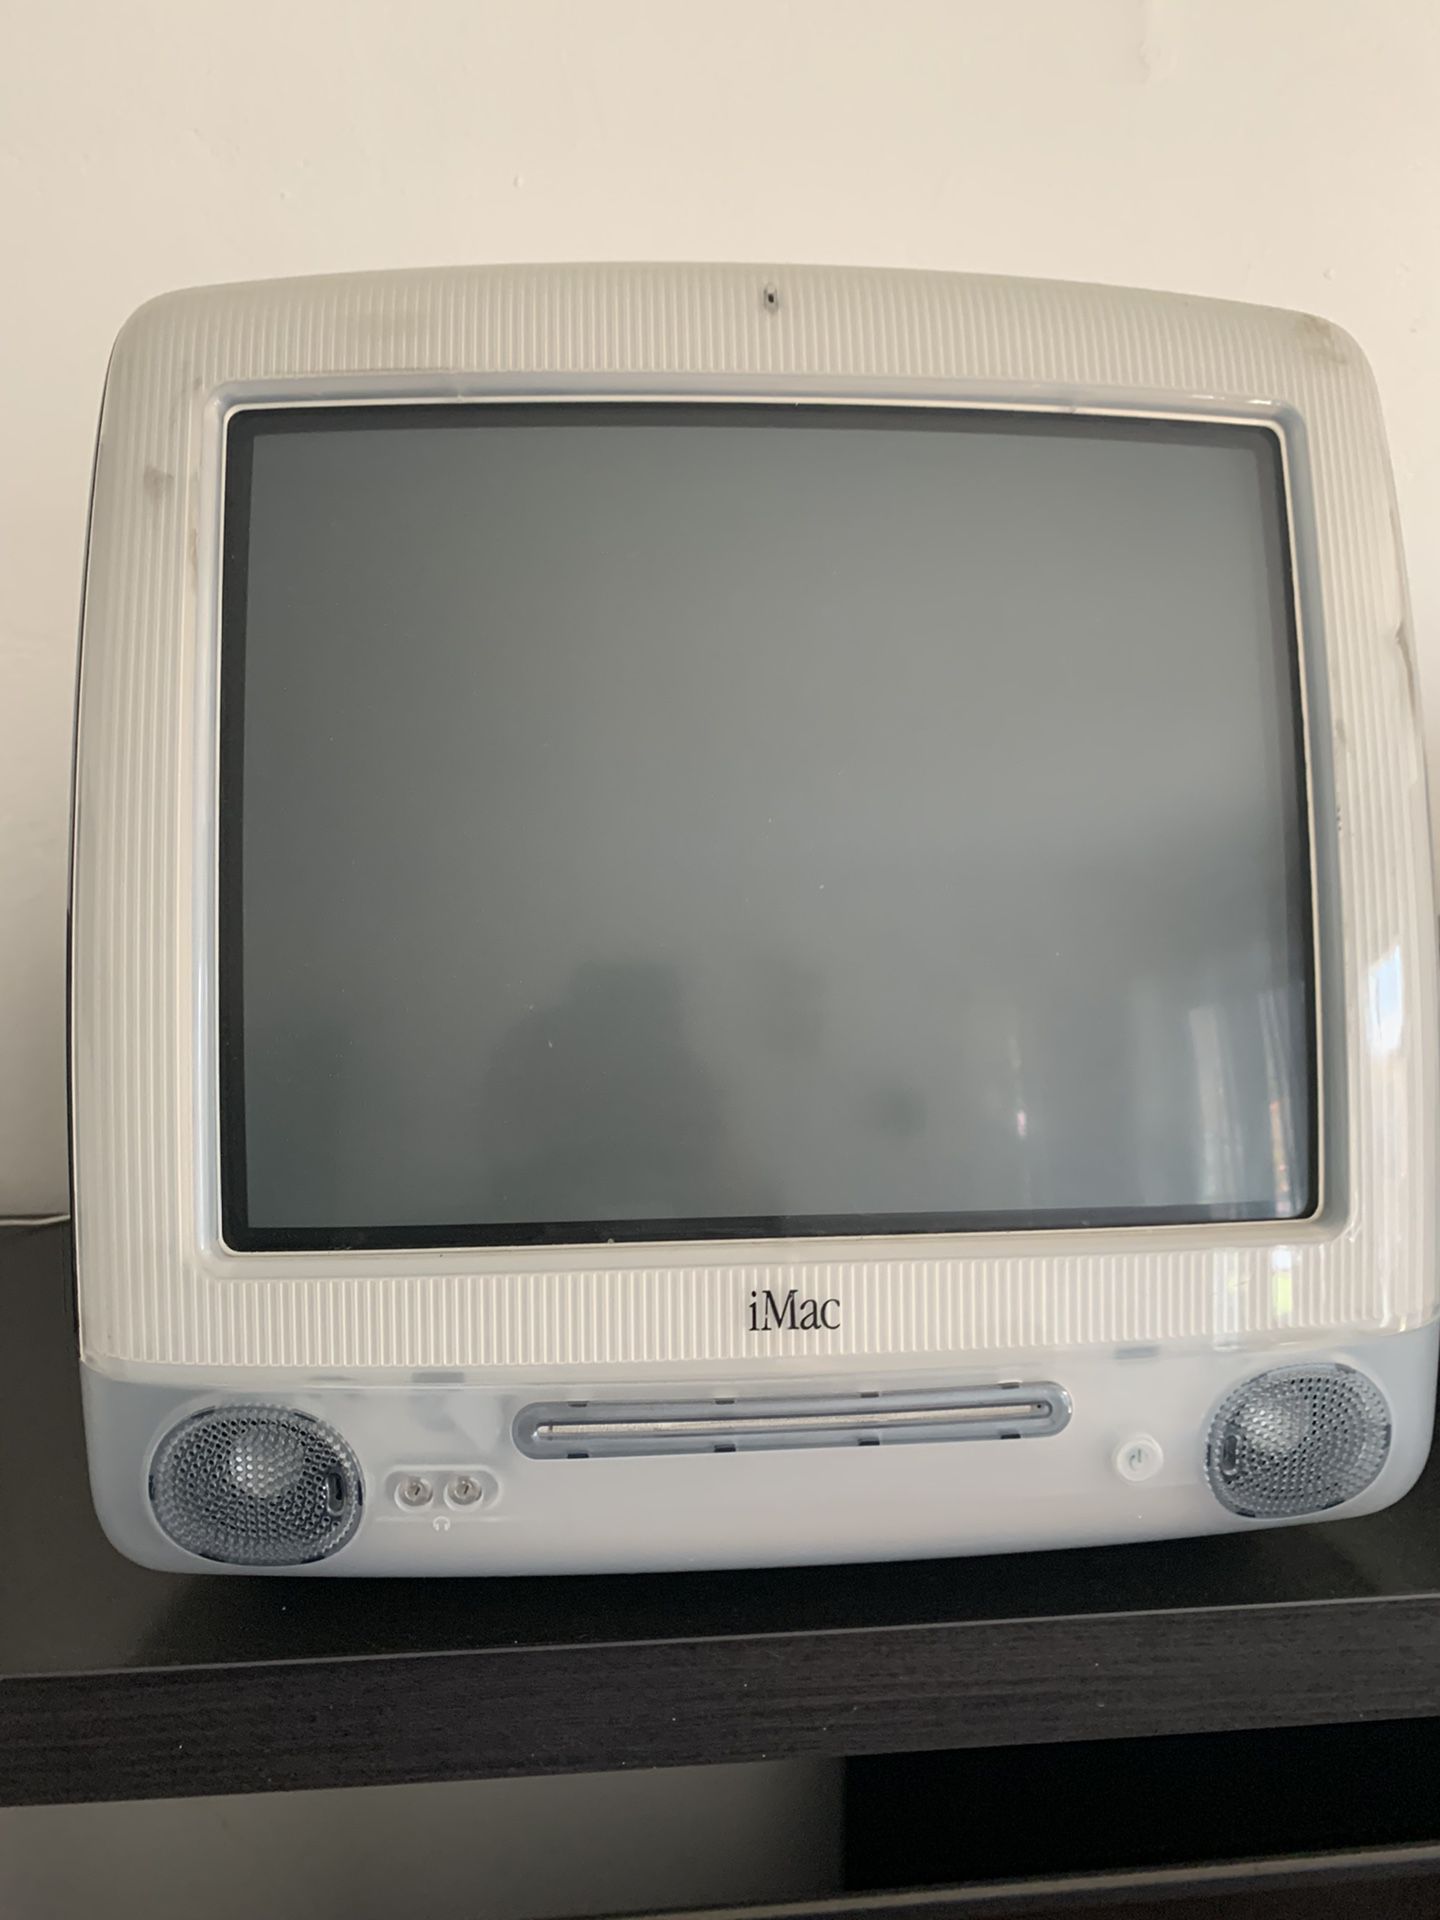 iMac G3 fall 1999 in good condition fully operational